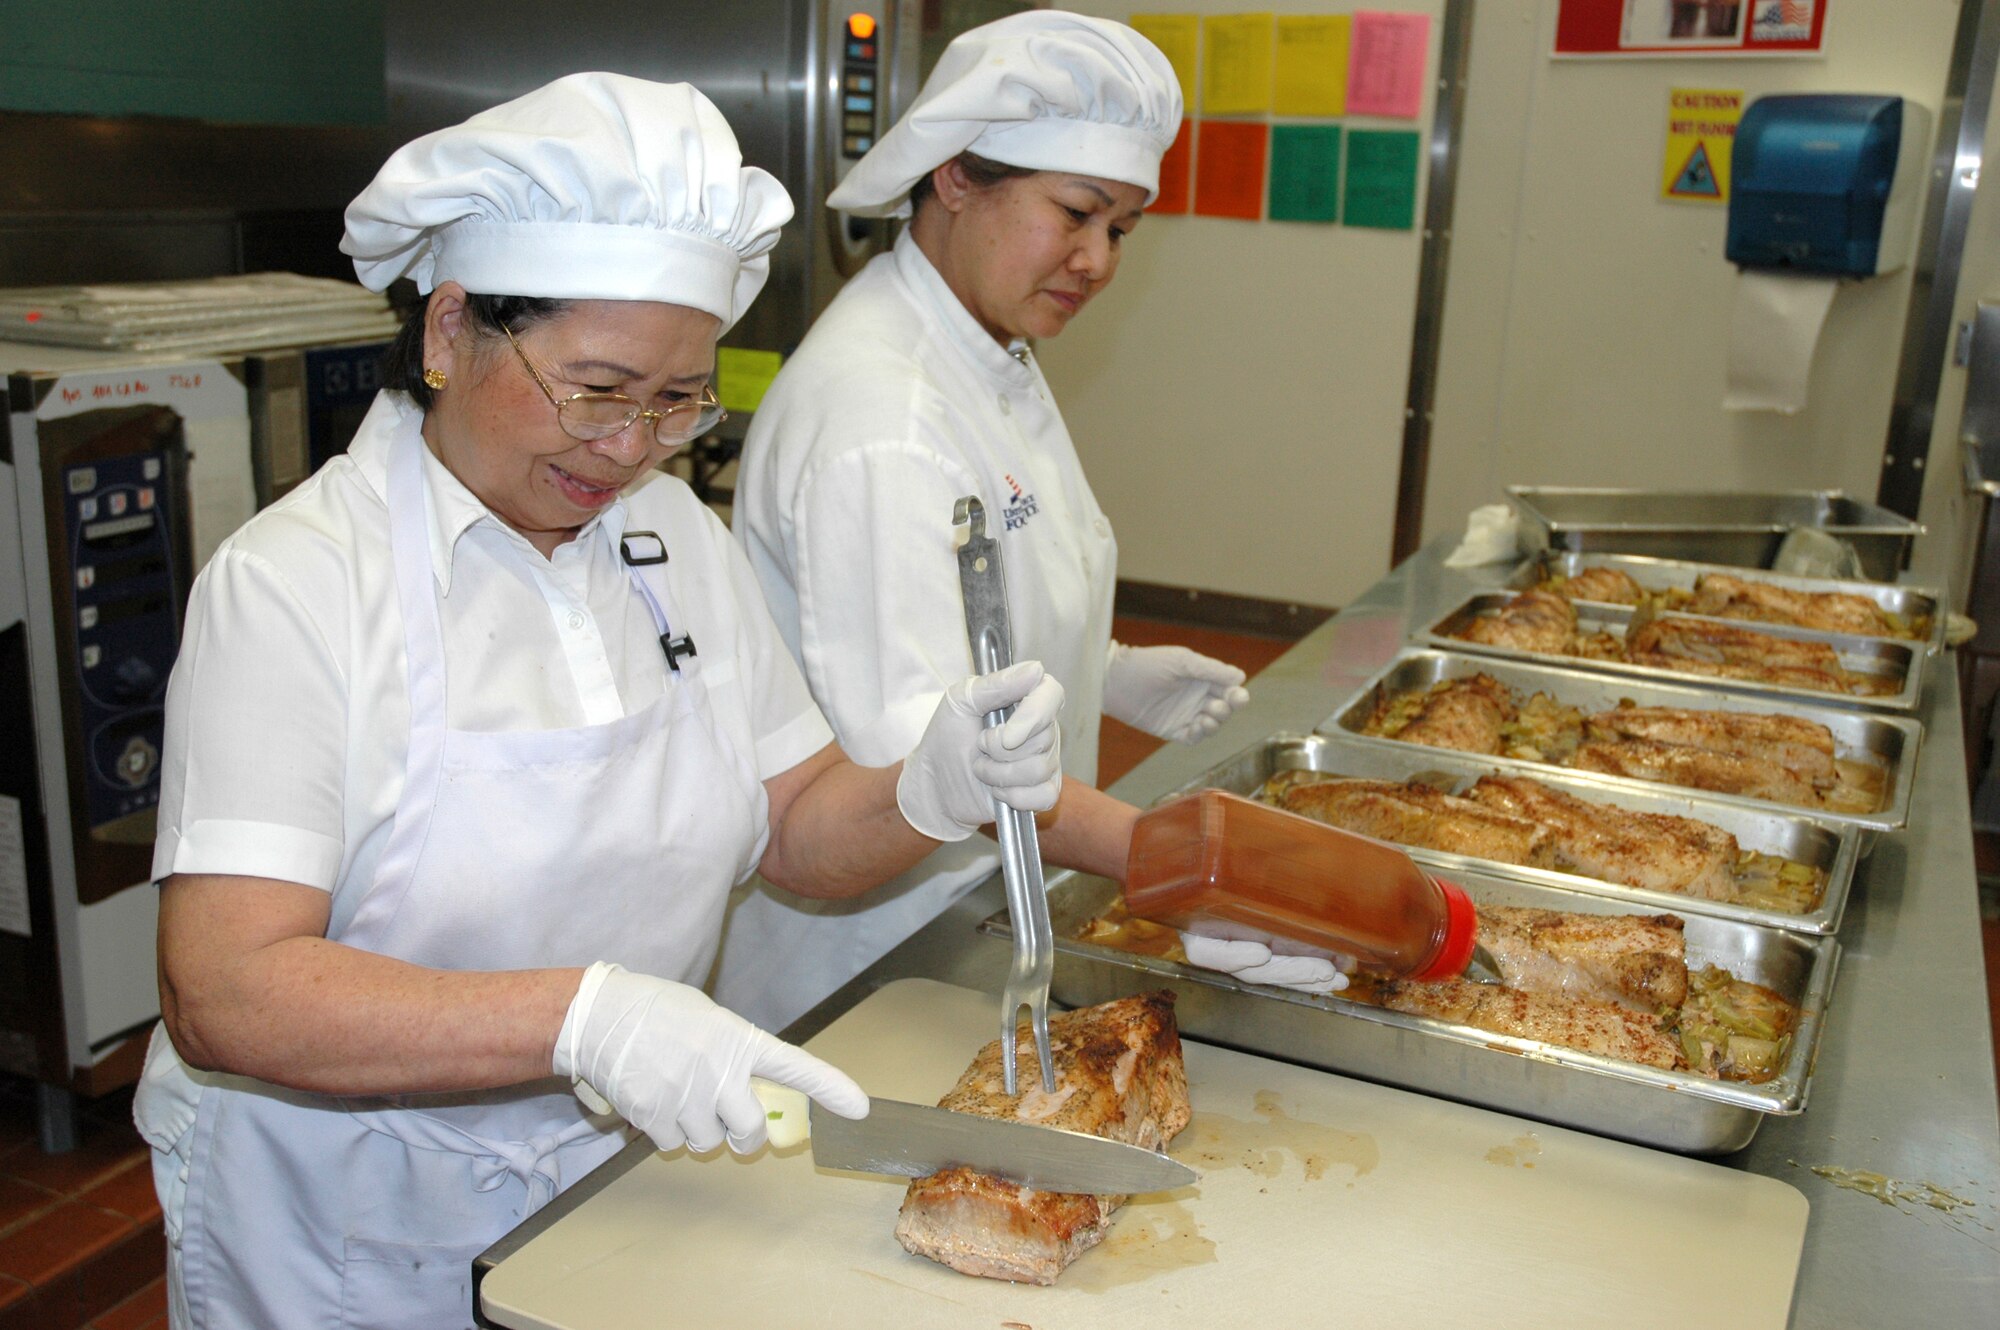 Cooks, Somchit Moslak and Chanphen Duncan, work on dinner for hungry Airmen at the Hillcrest dining facility. Their skills are one of the areas being evaluated for the Hennessy Award. 